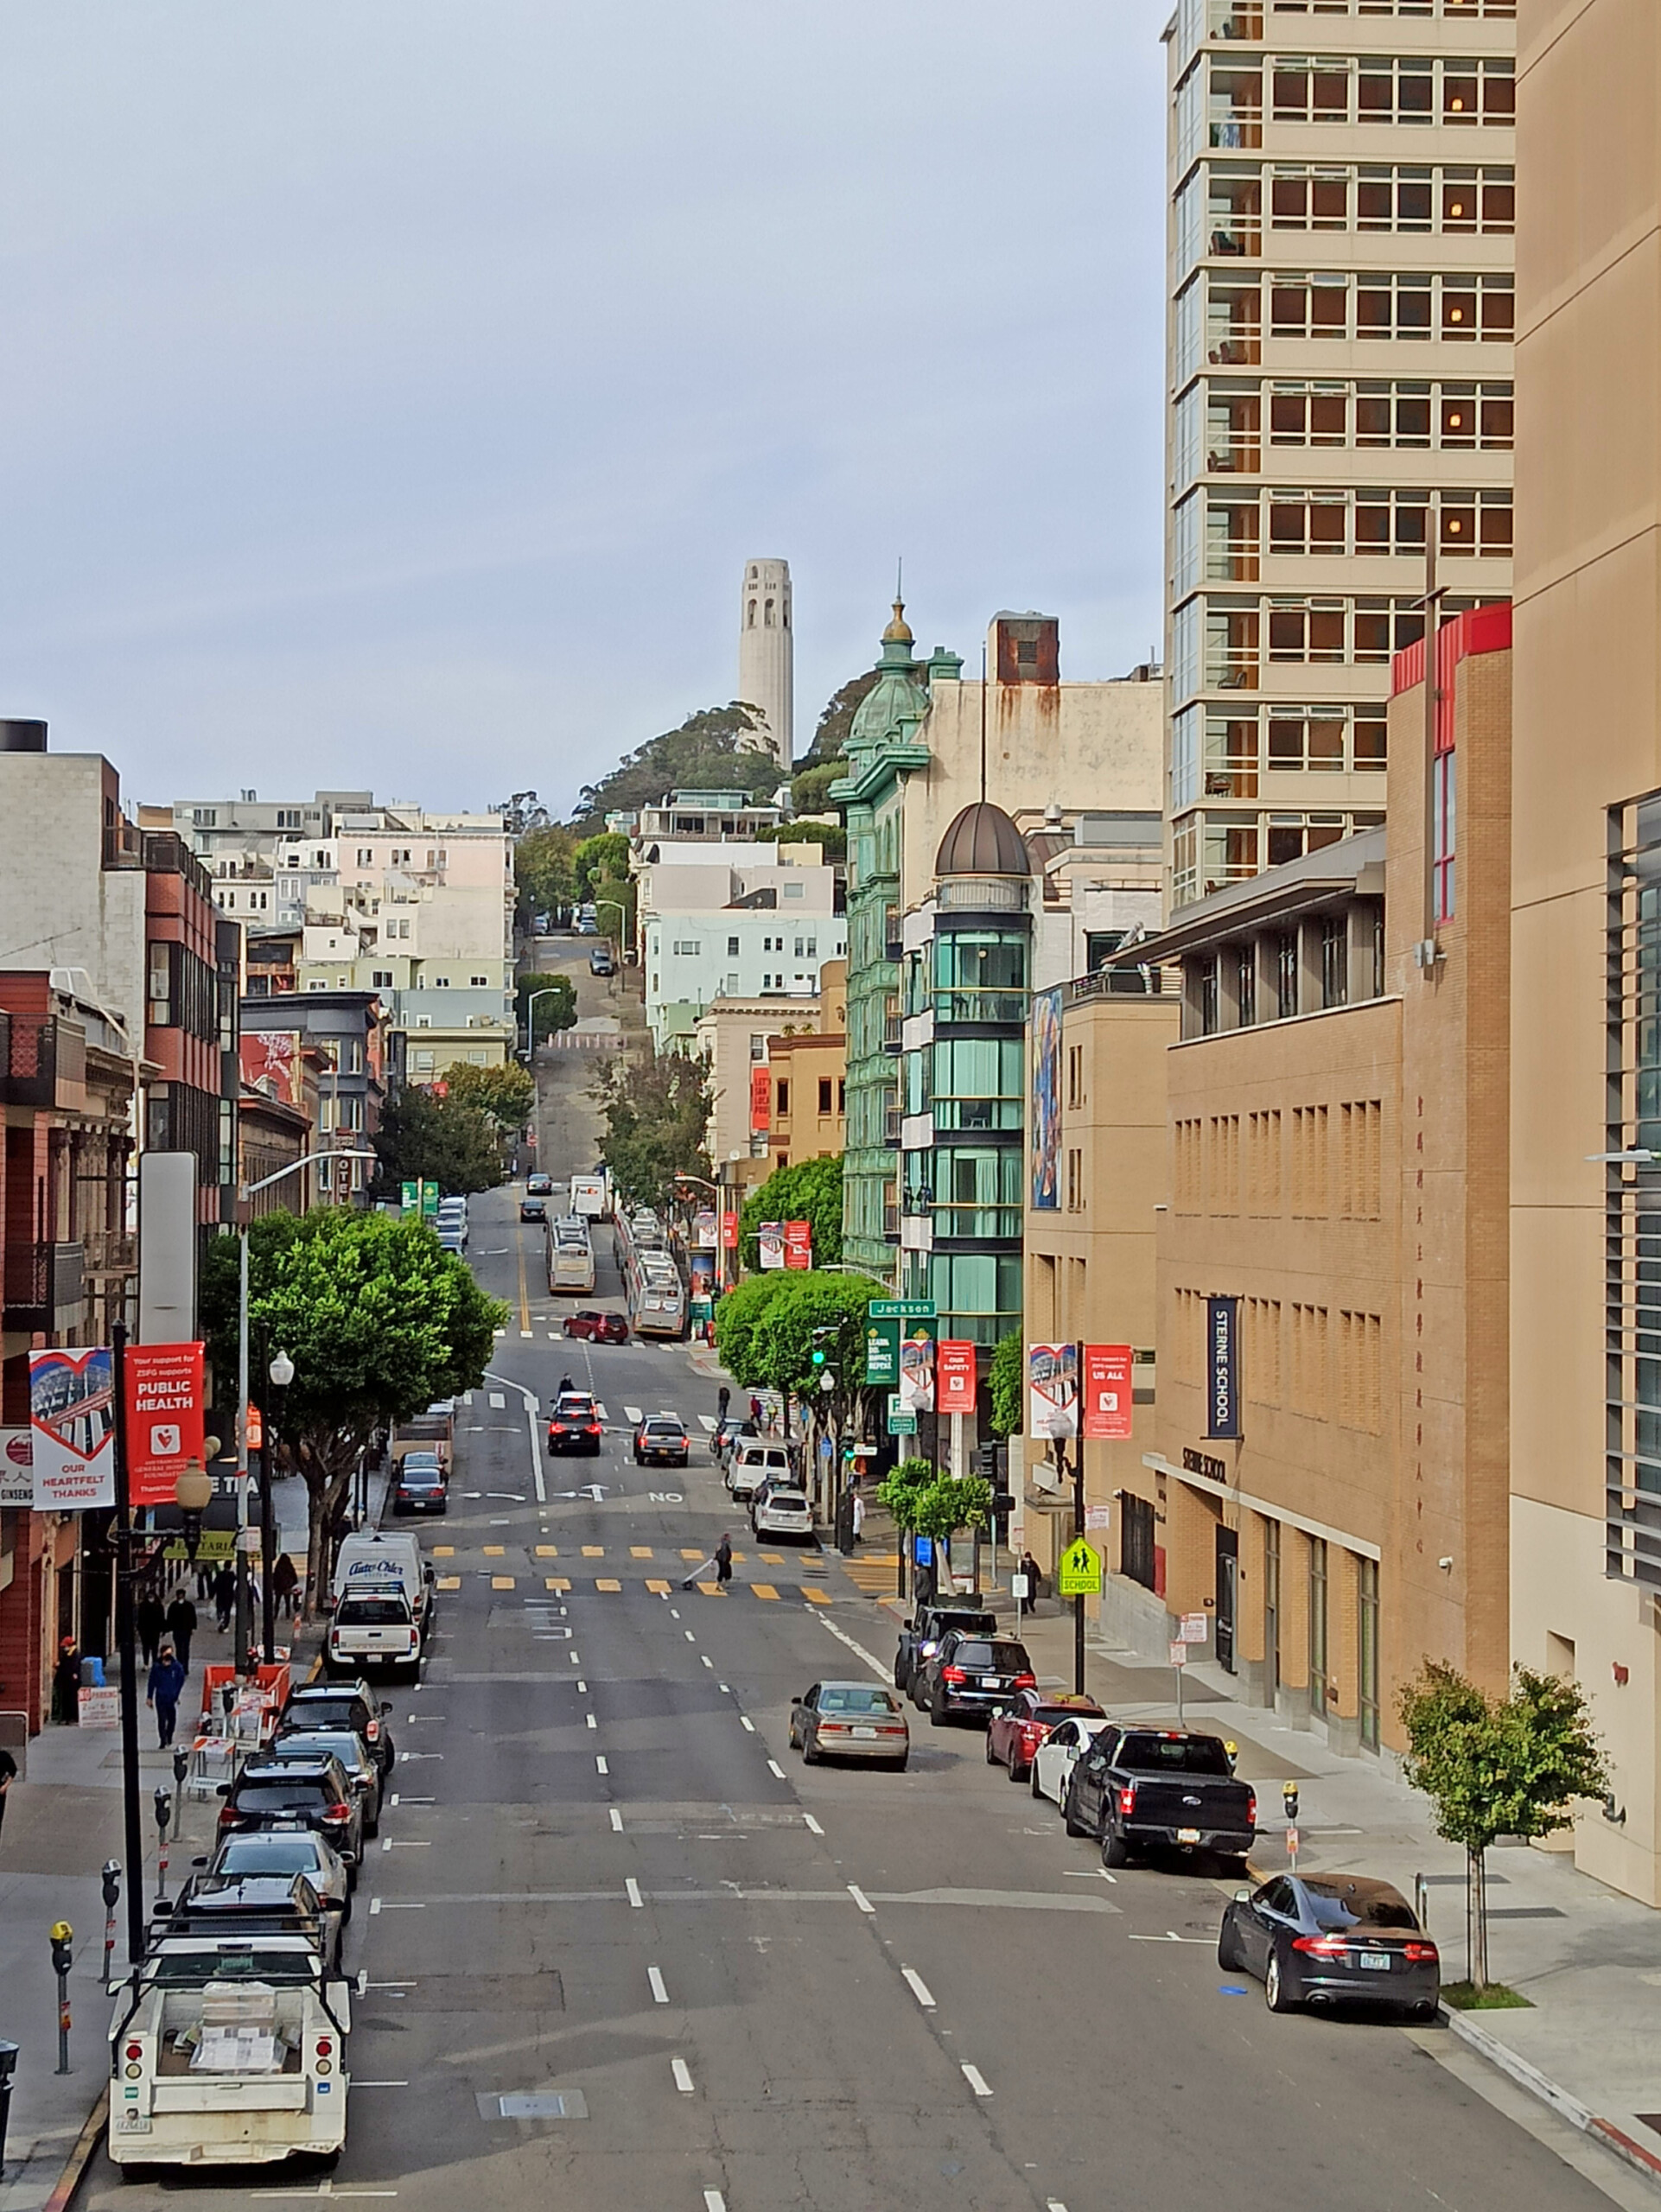 San Francisco's Hilly Cityscape with Coit Tower in the Background